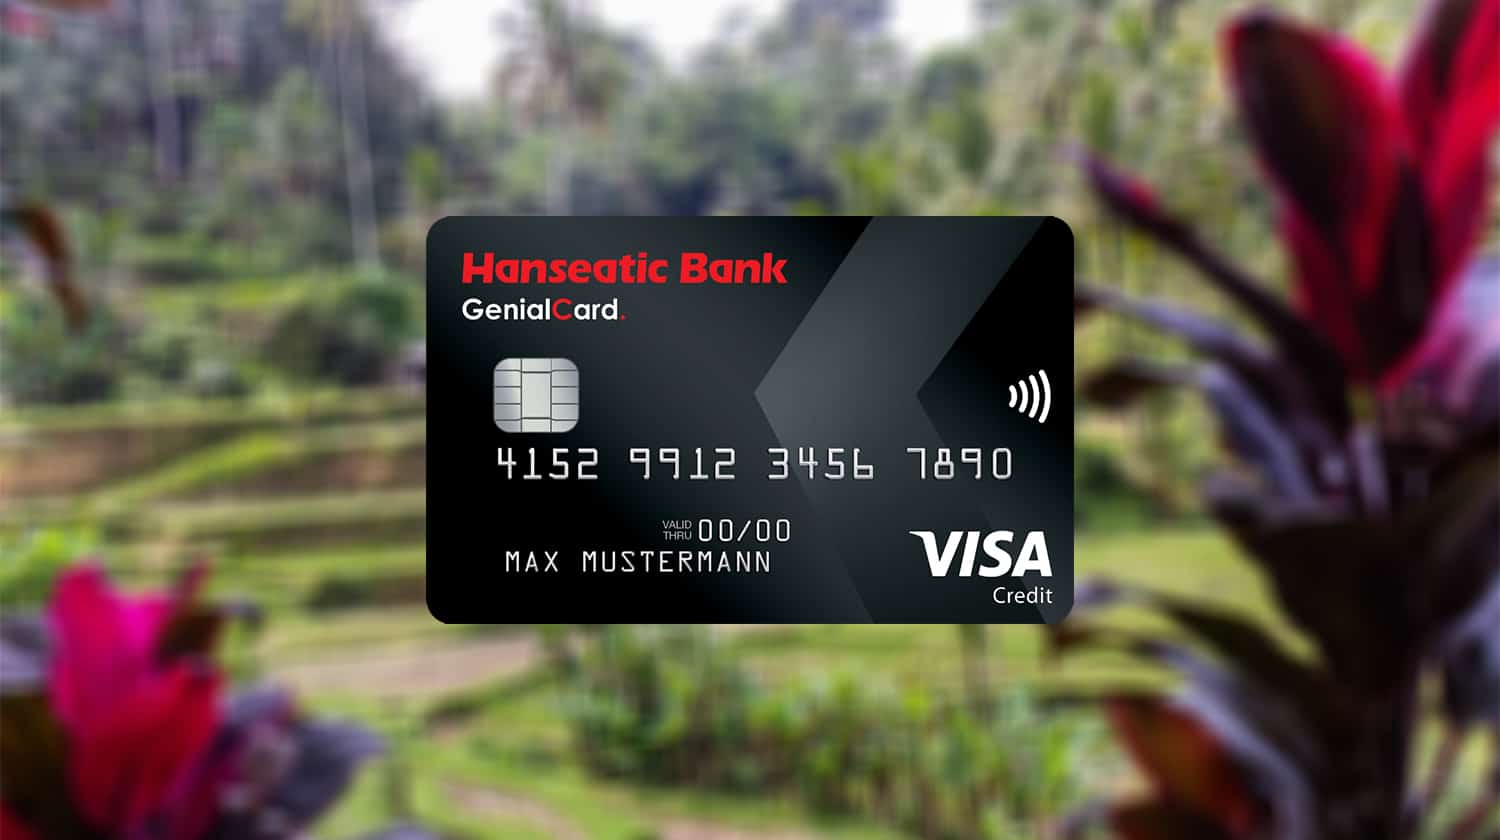 Hanseatic Bank Credit Card - Learn How to Order the Gold Card